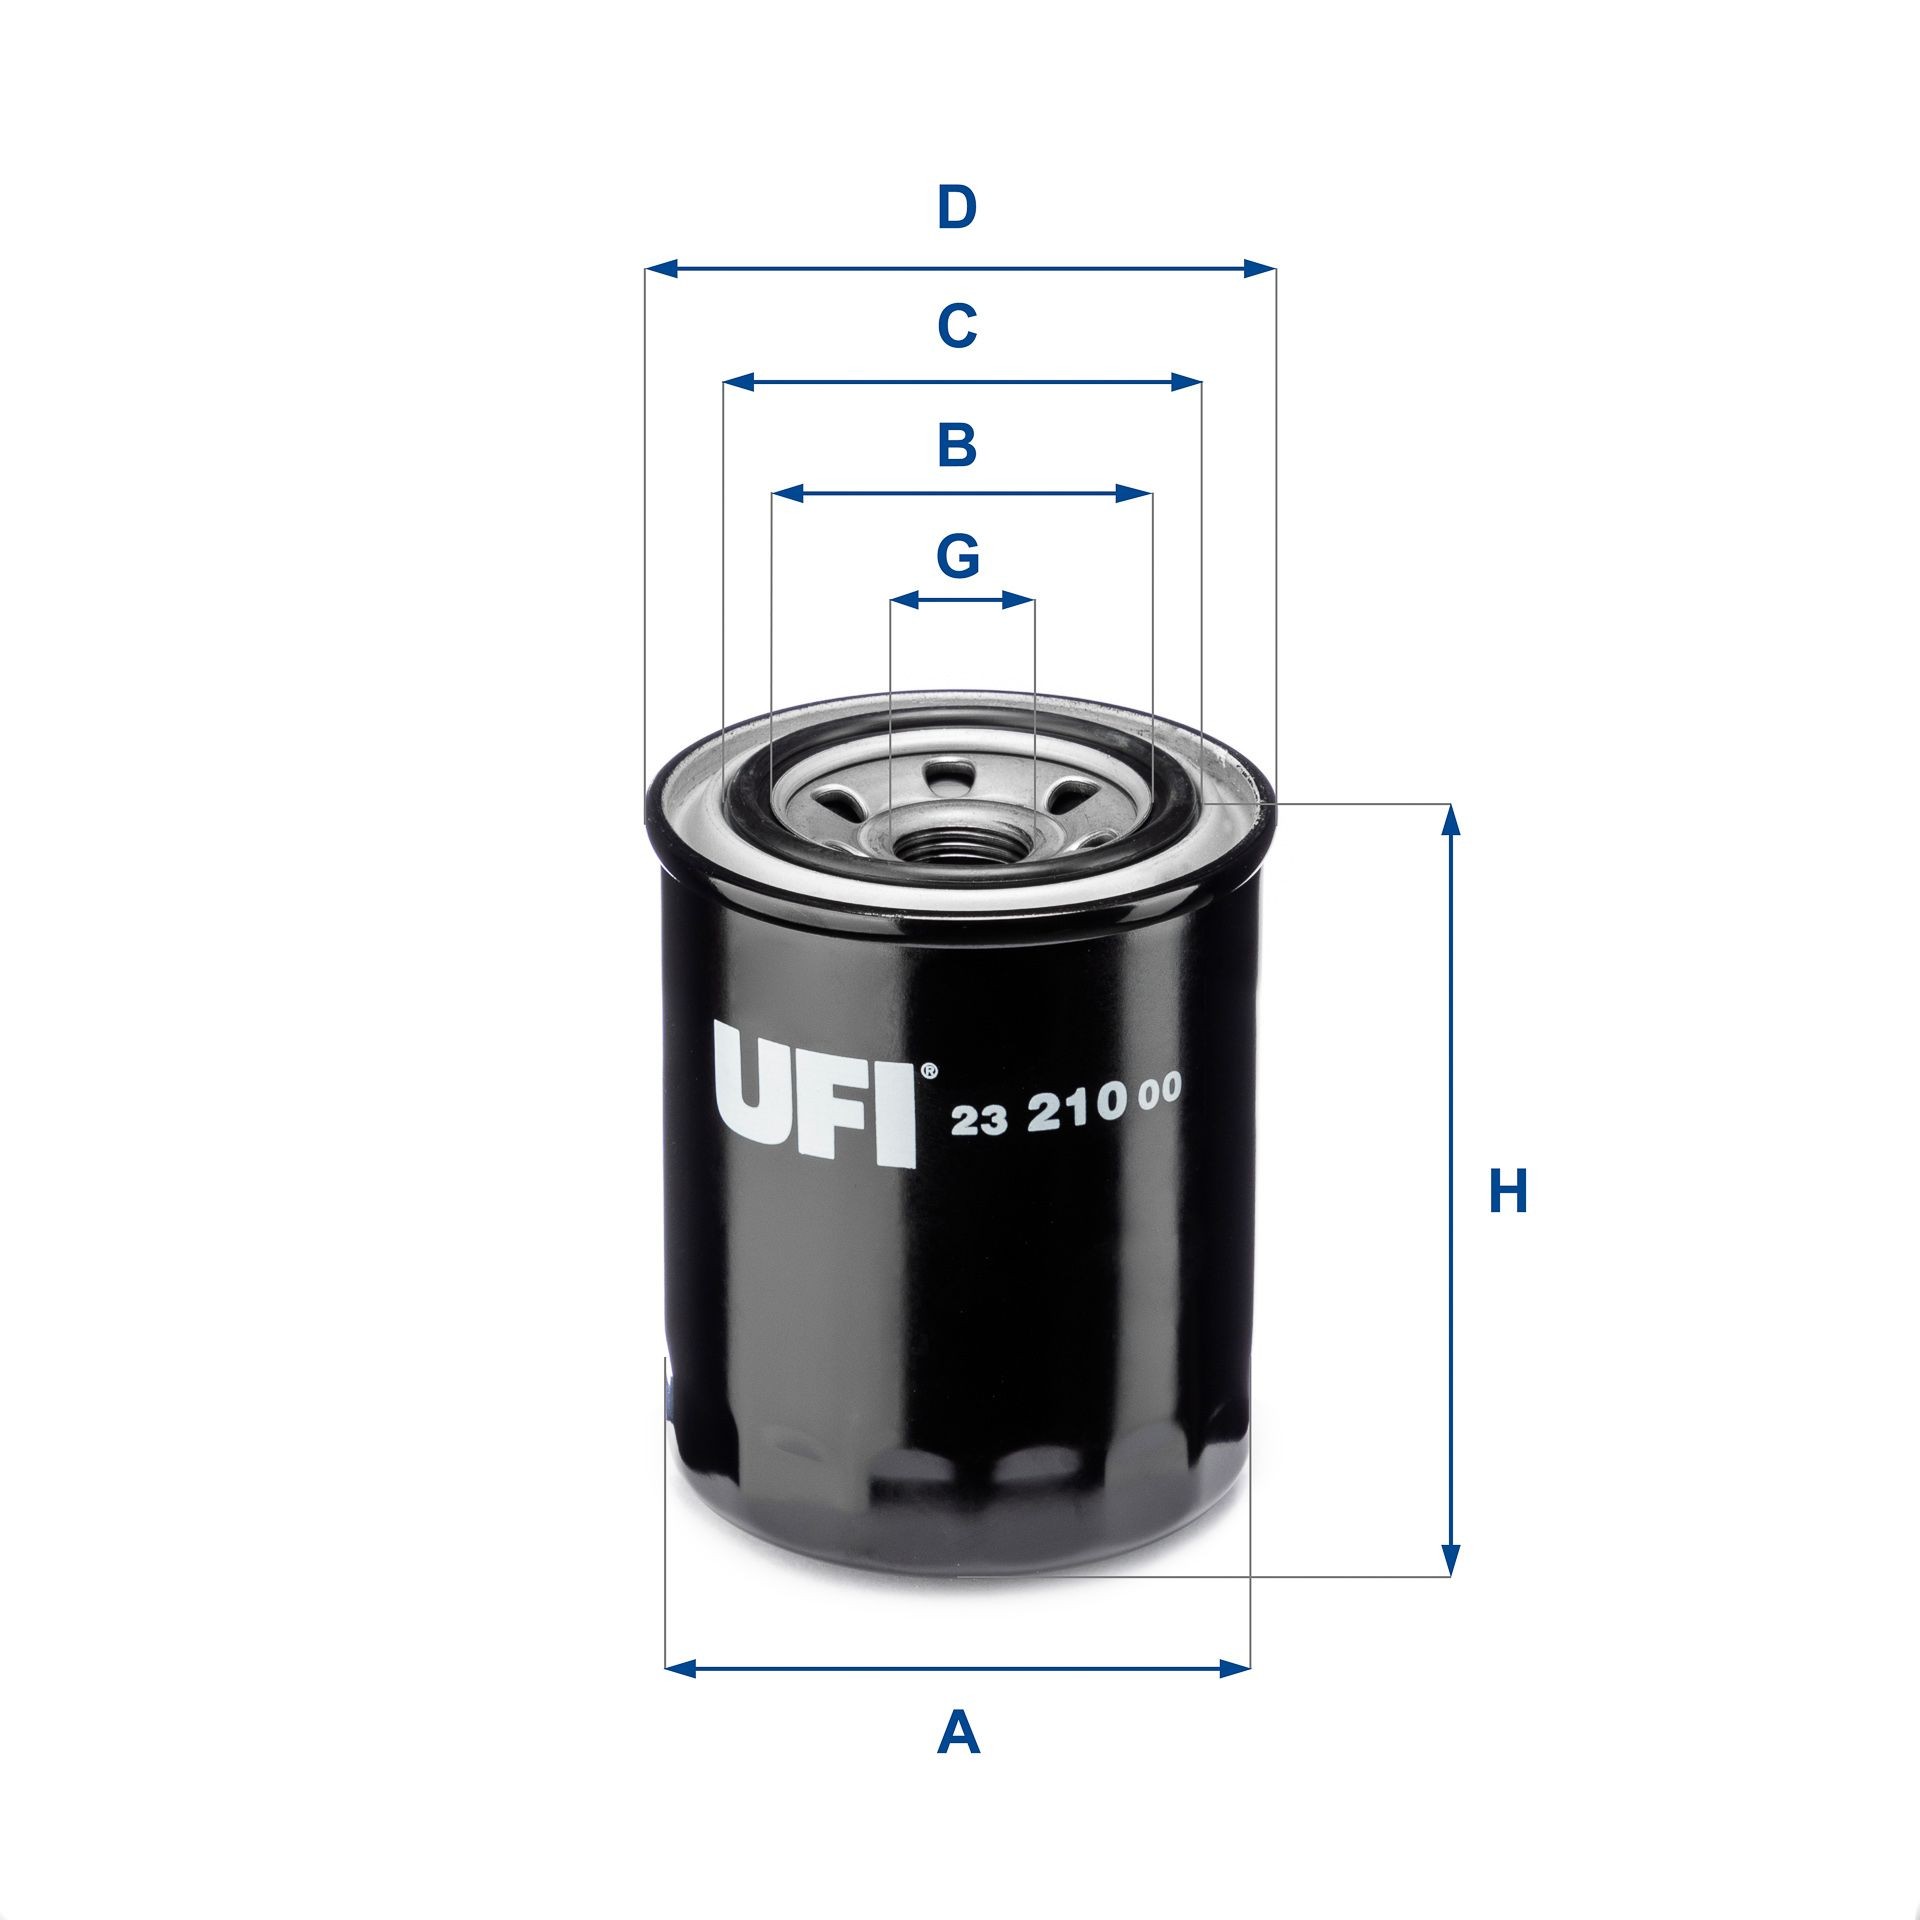 UFI 23.210.00 Oil filter 3/4-16 UNF, with one anti-return valve, Spin-on Filter